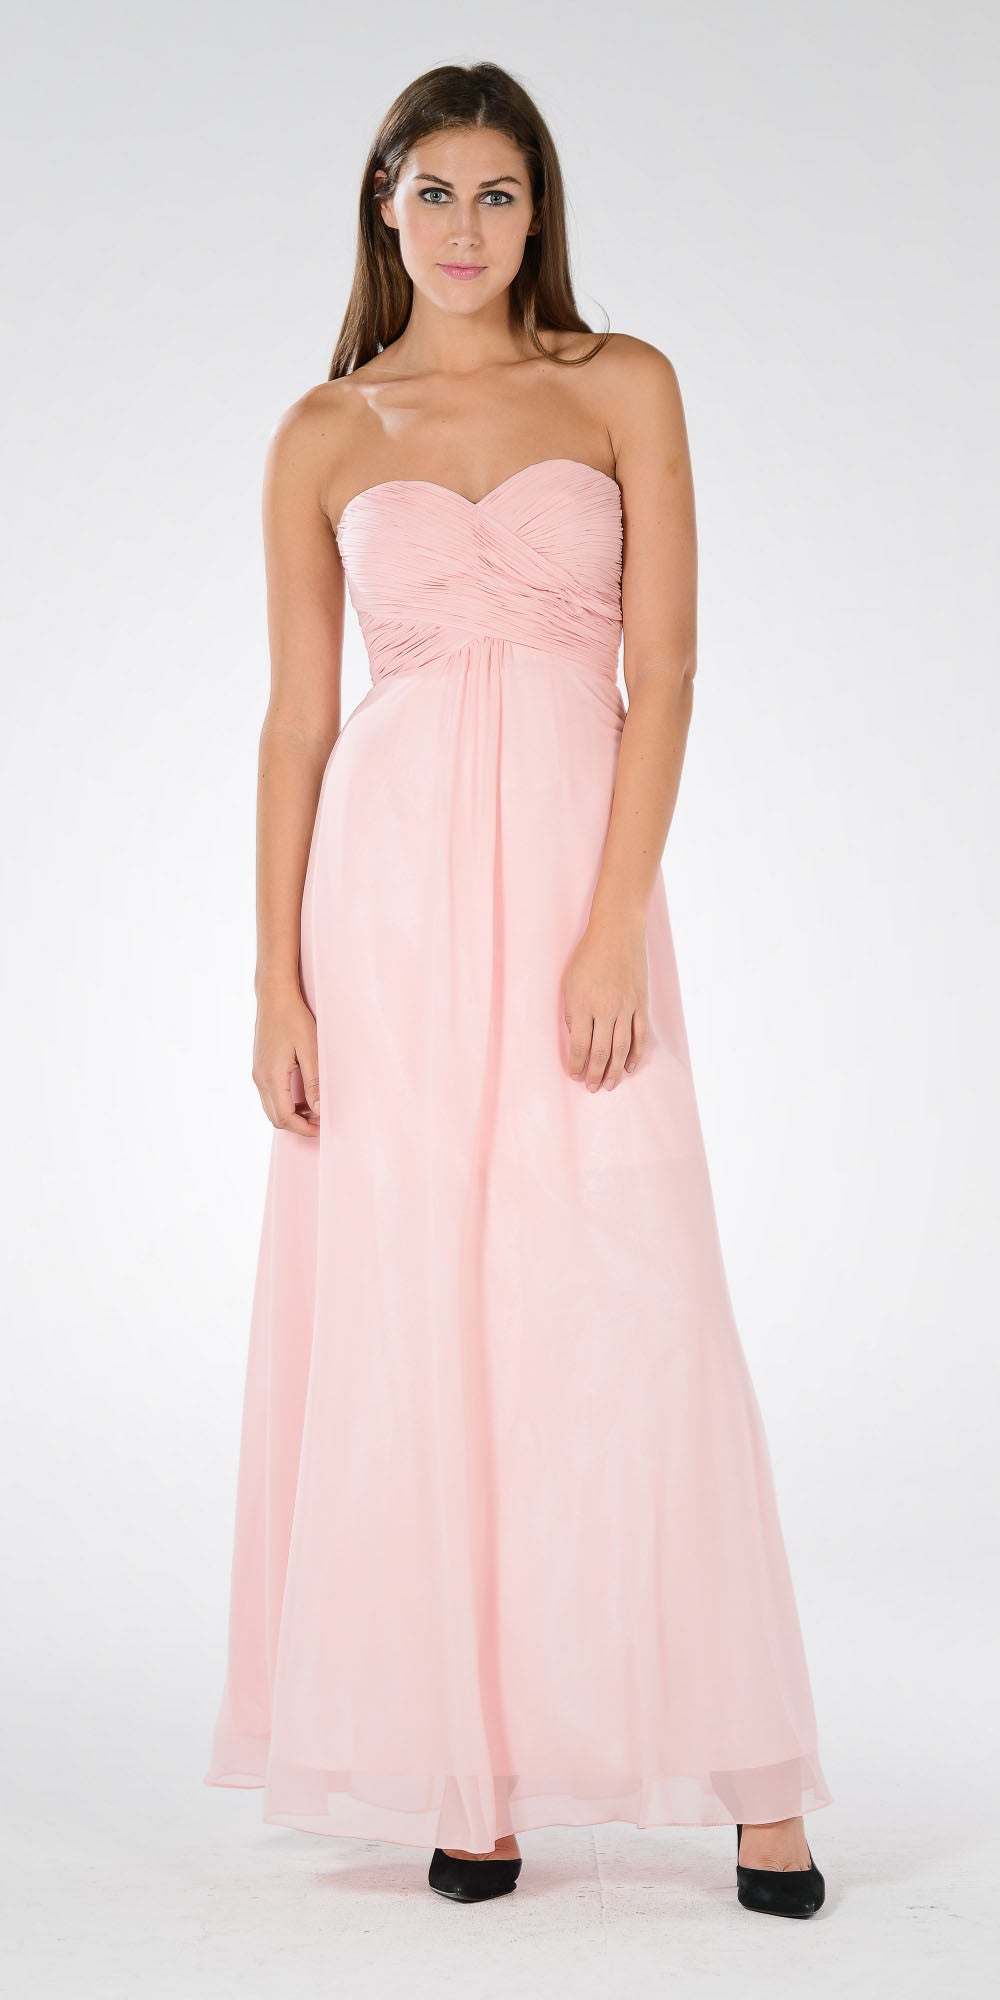 Sweetheart Strapless Ruched Bodice Lace Up Back Long Bridesmaids Dress Blush